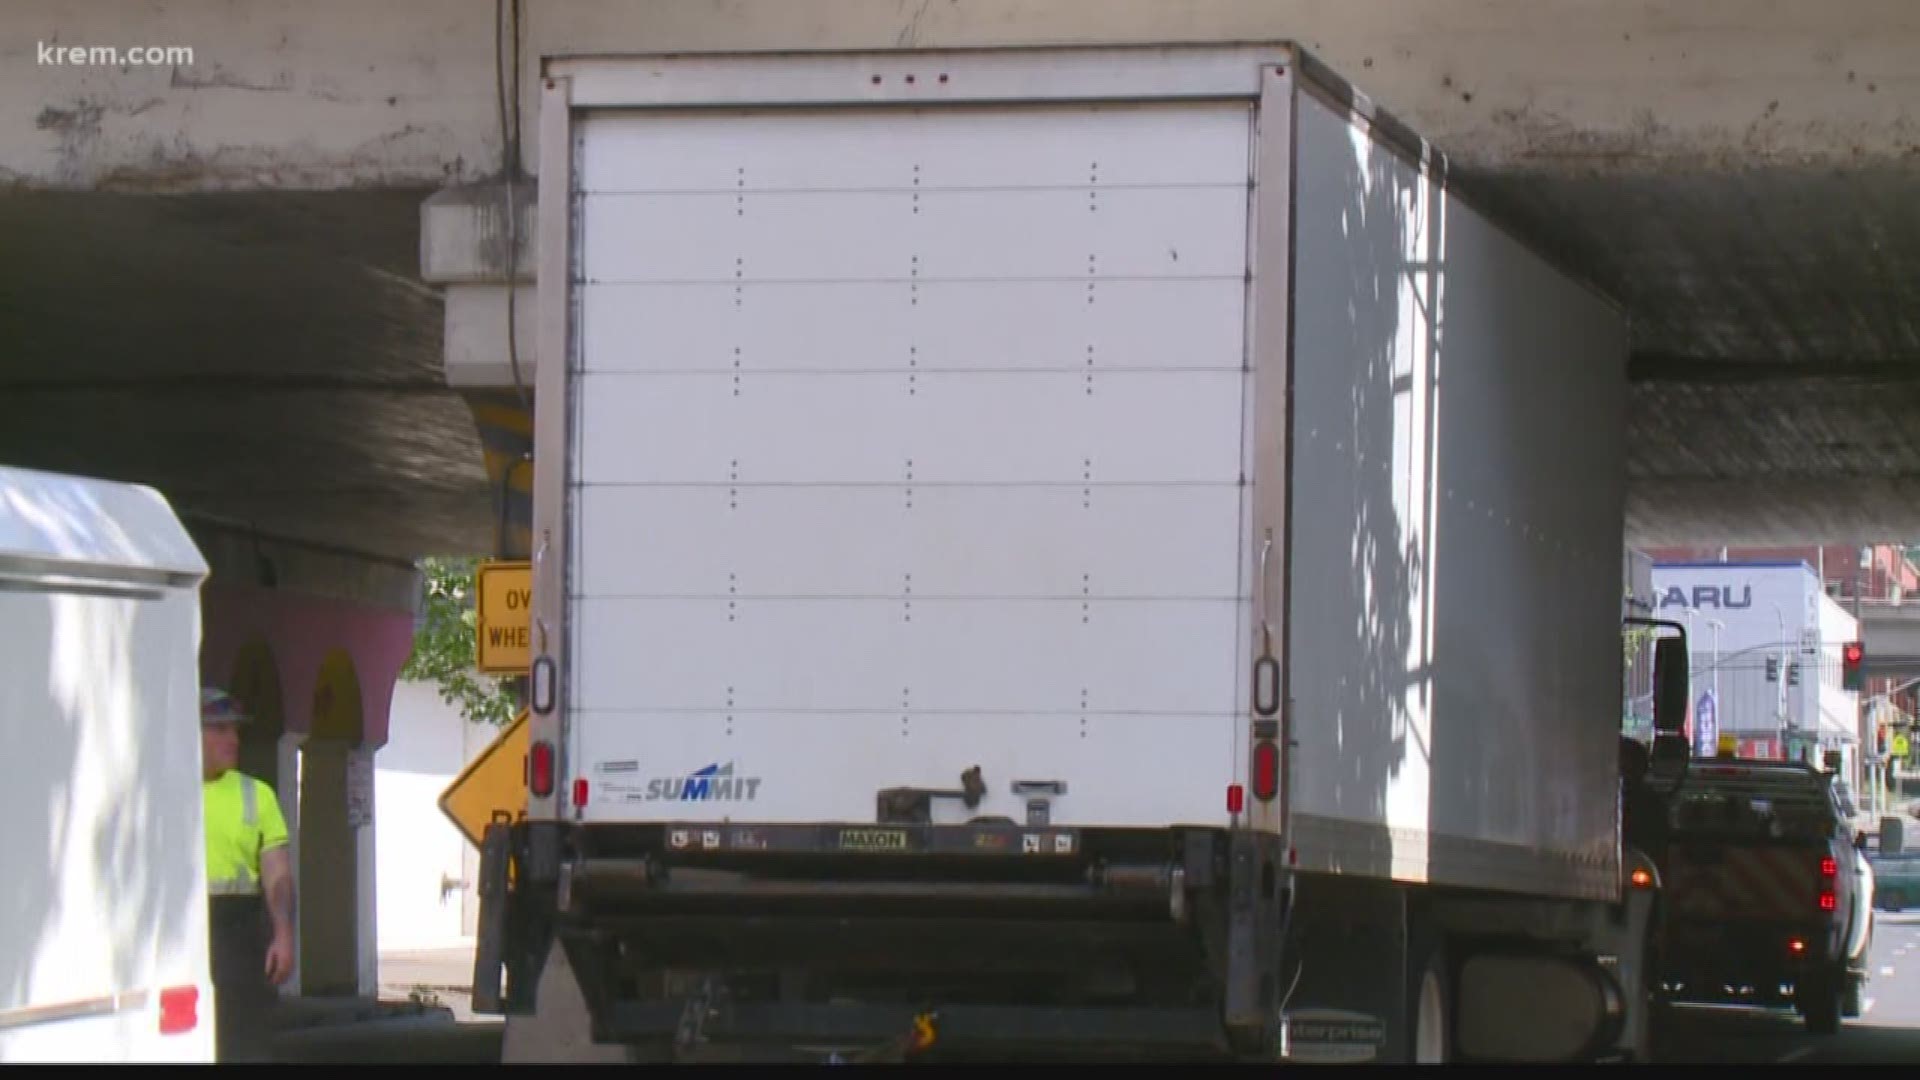 This kind of thing used to happen so frequently, that about a year ago the city finally installed sensors to warn drivers if their trailer is too high. In light of the latest incident, KREM 2's Tim Pham asked the city if its working.